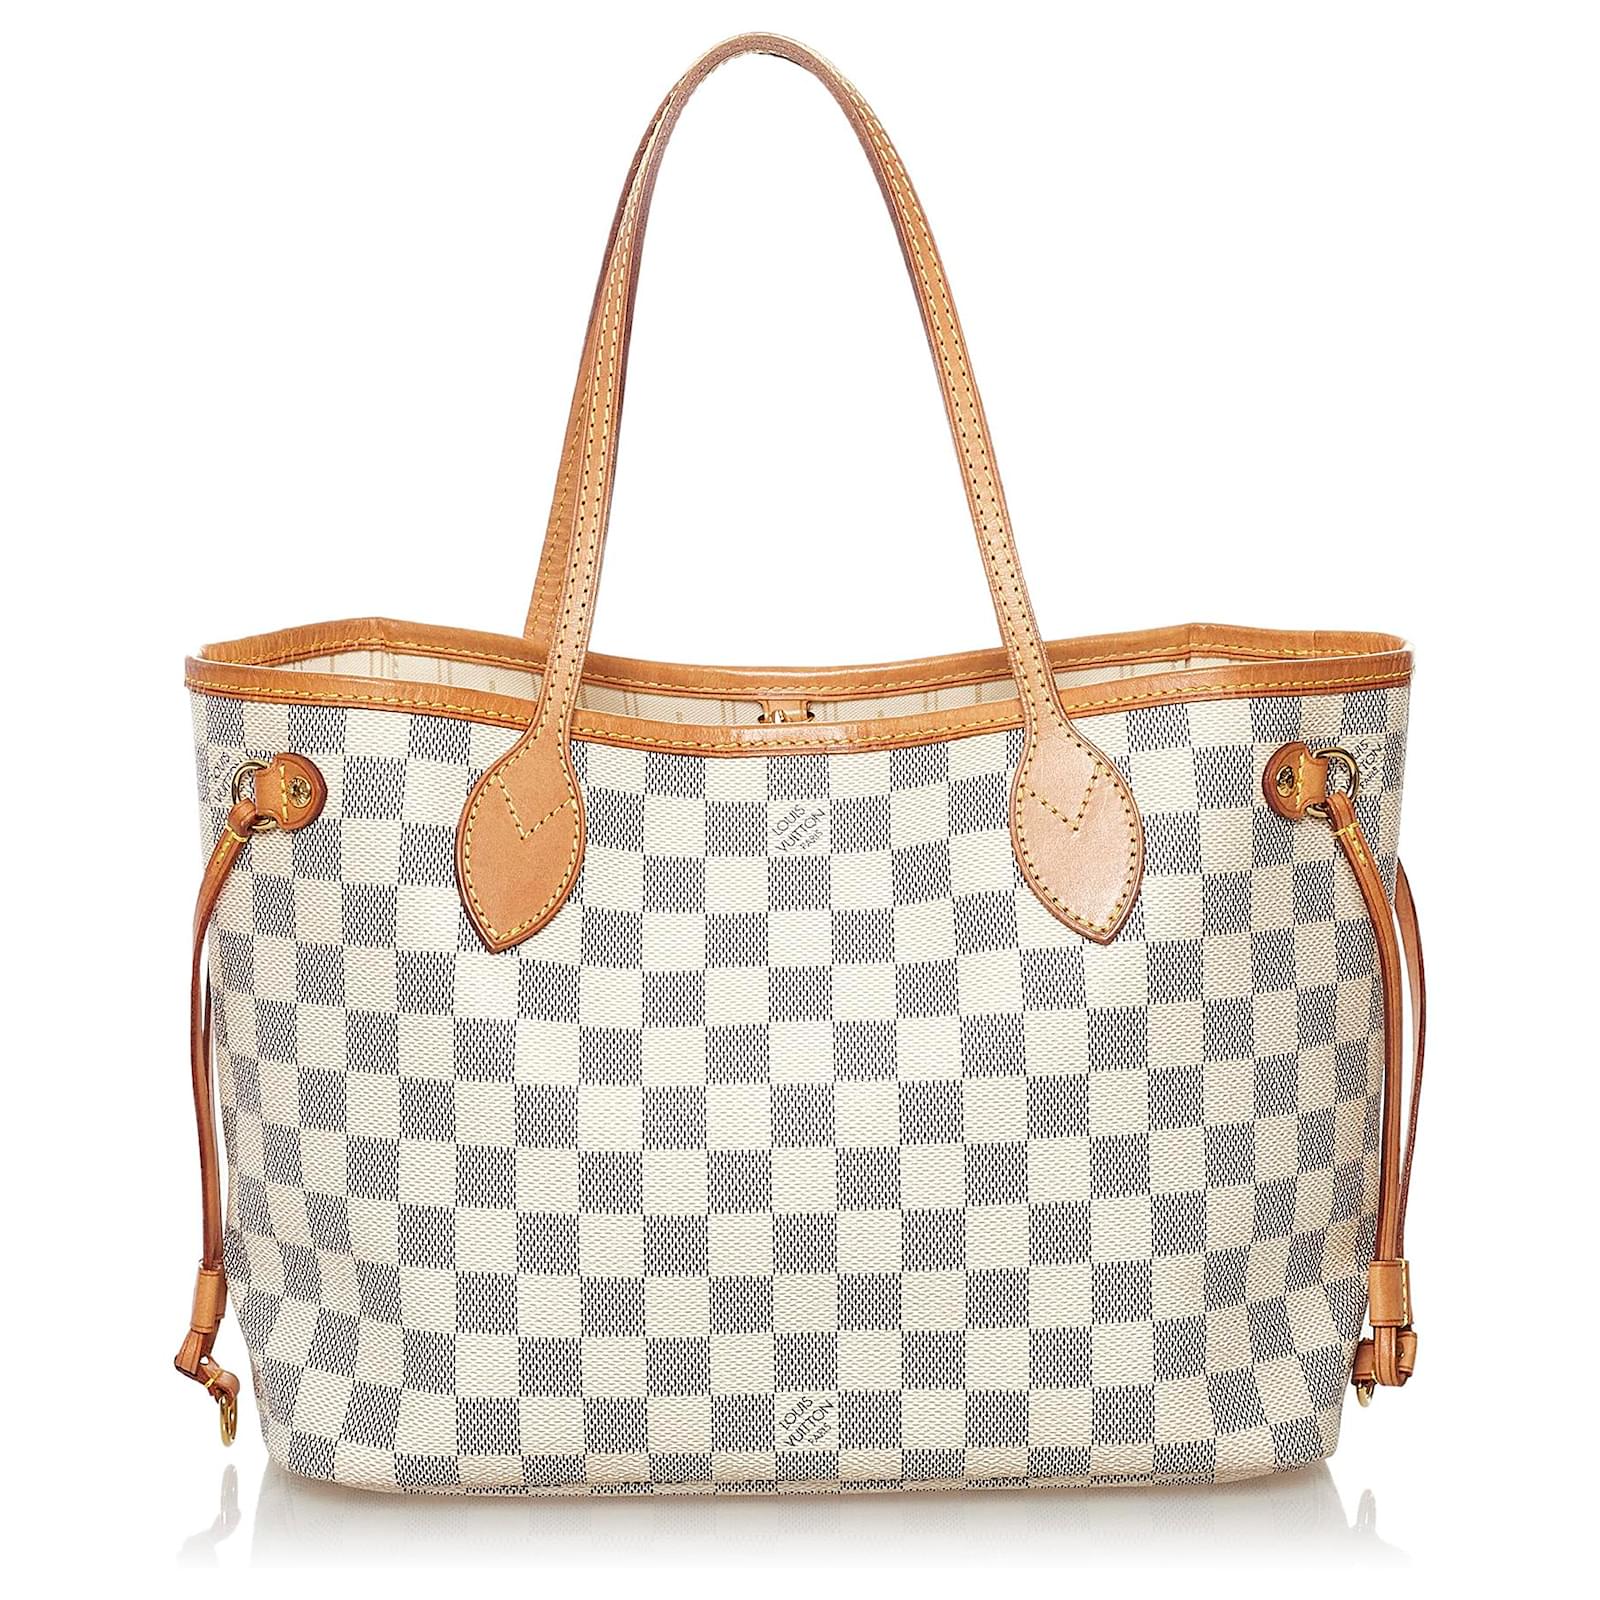 louis vuitton neverfull blue and white